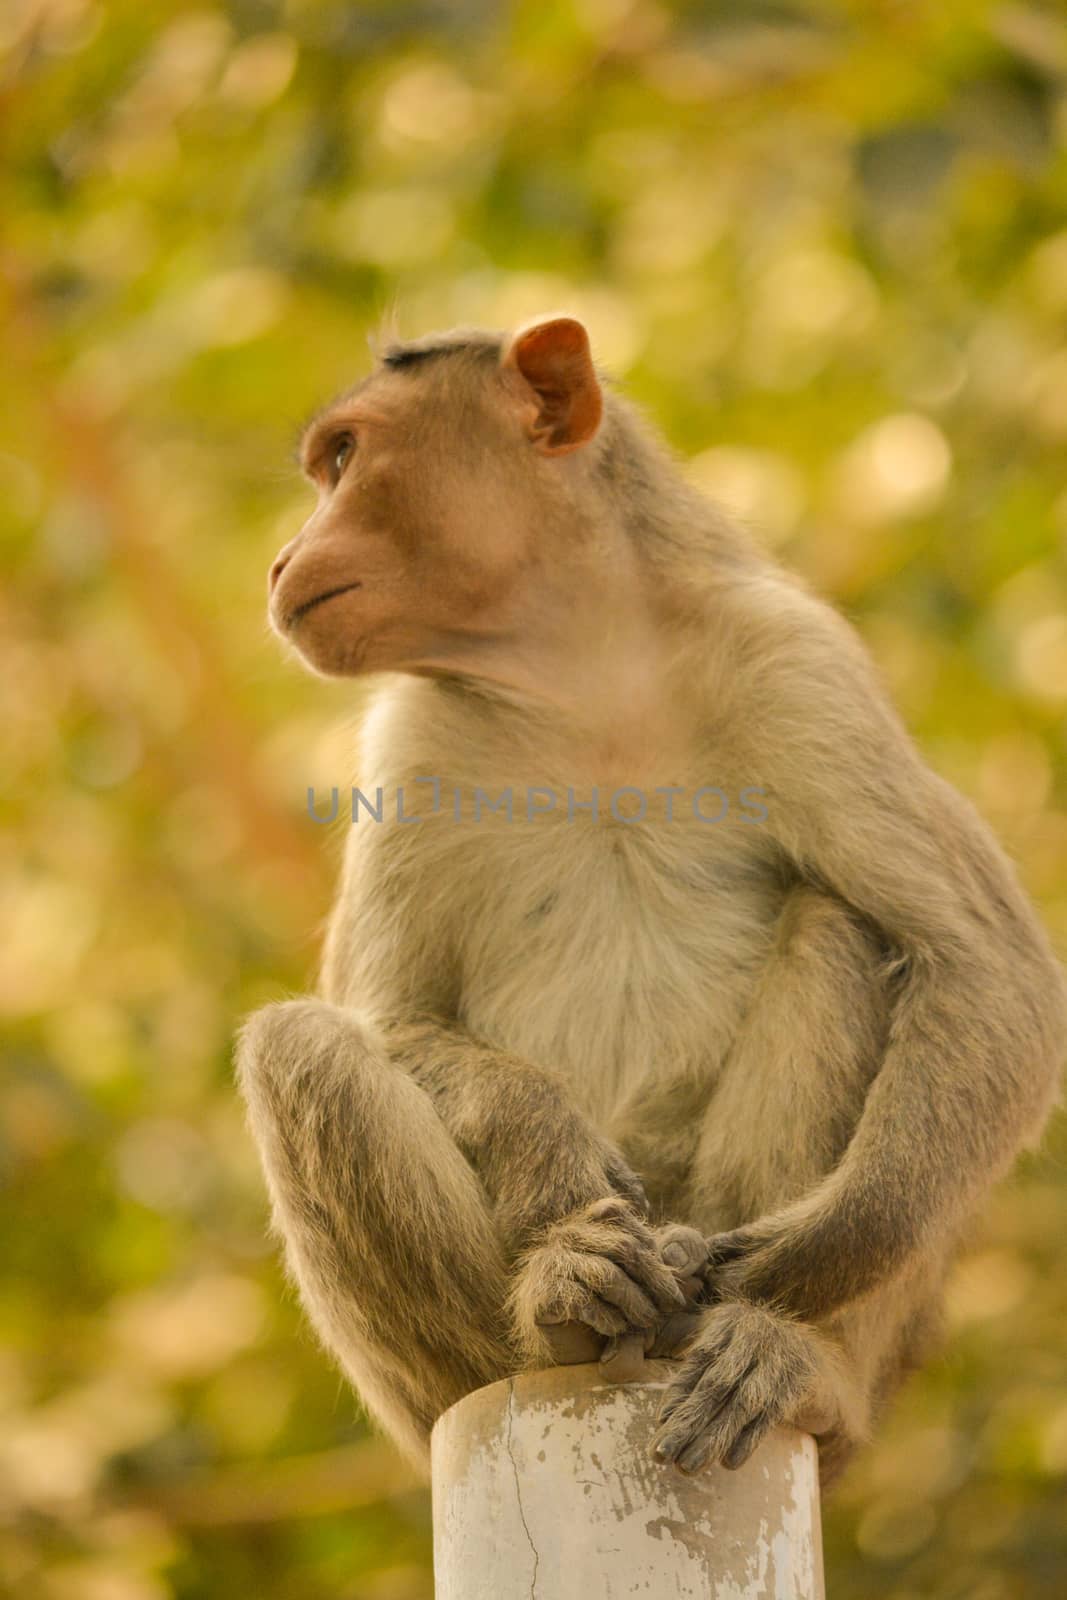 bonnet macaque sitting on pole during morning.